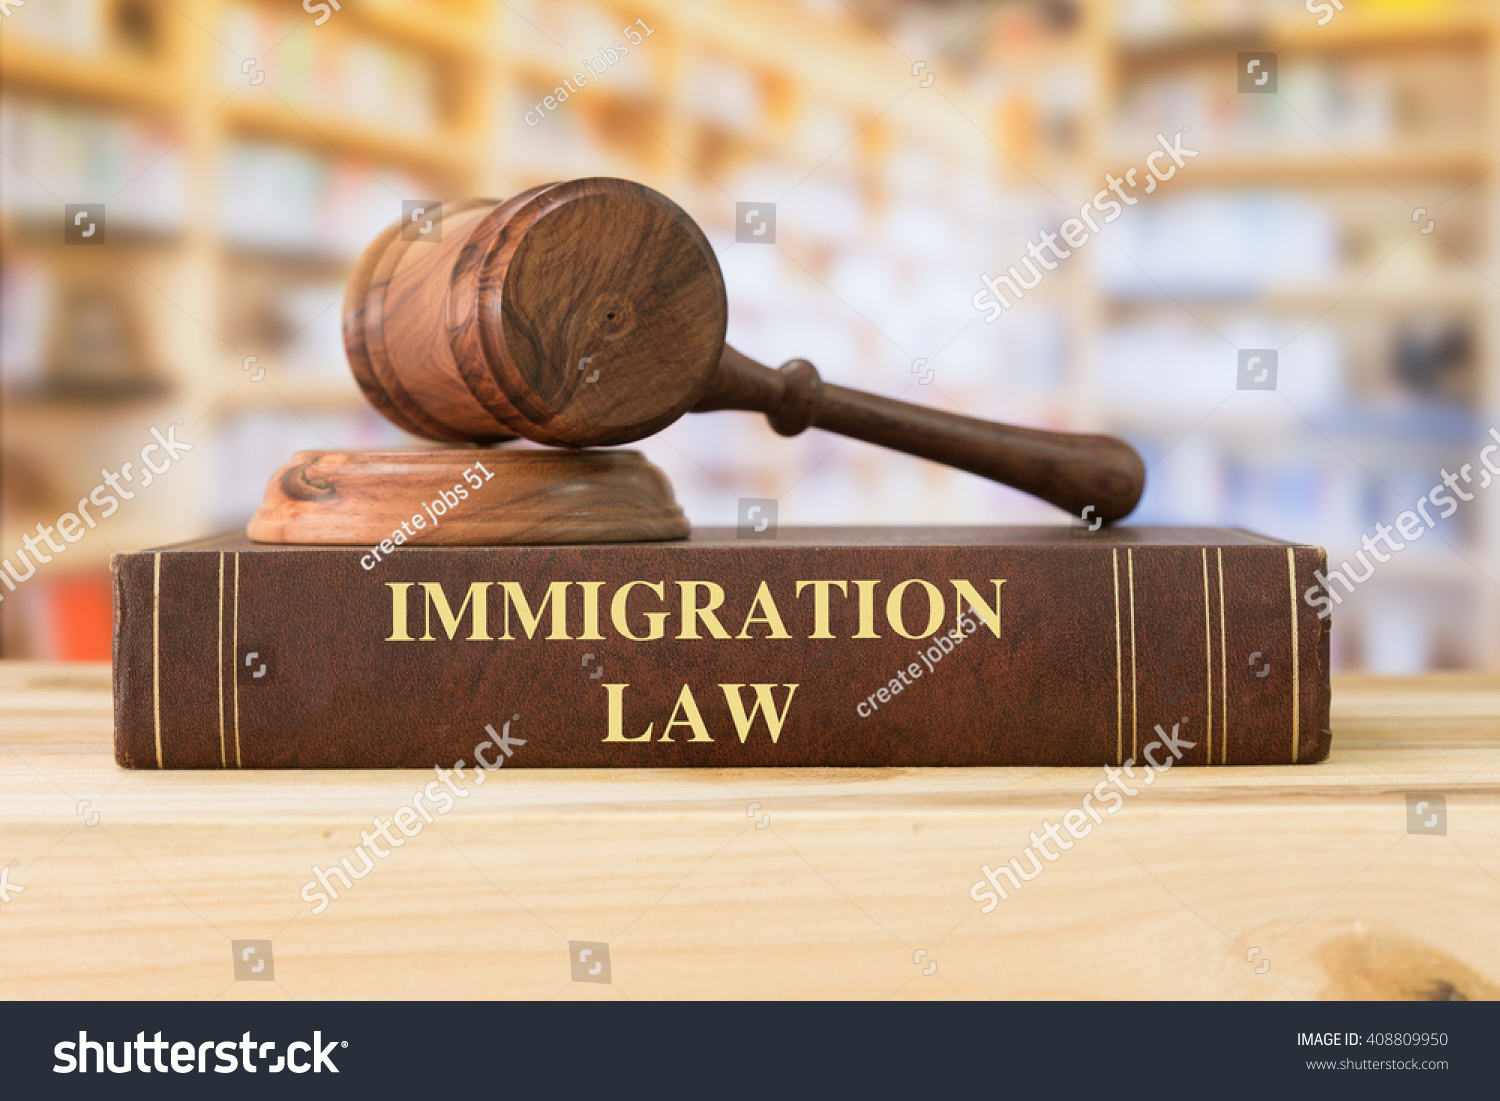 Immigration Law books with a judges gavel on desk in the library. Legal education concept.  #408809950